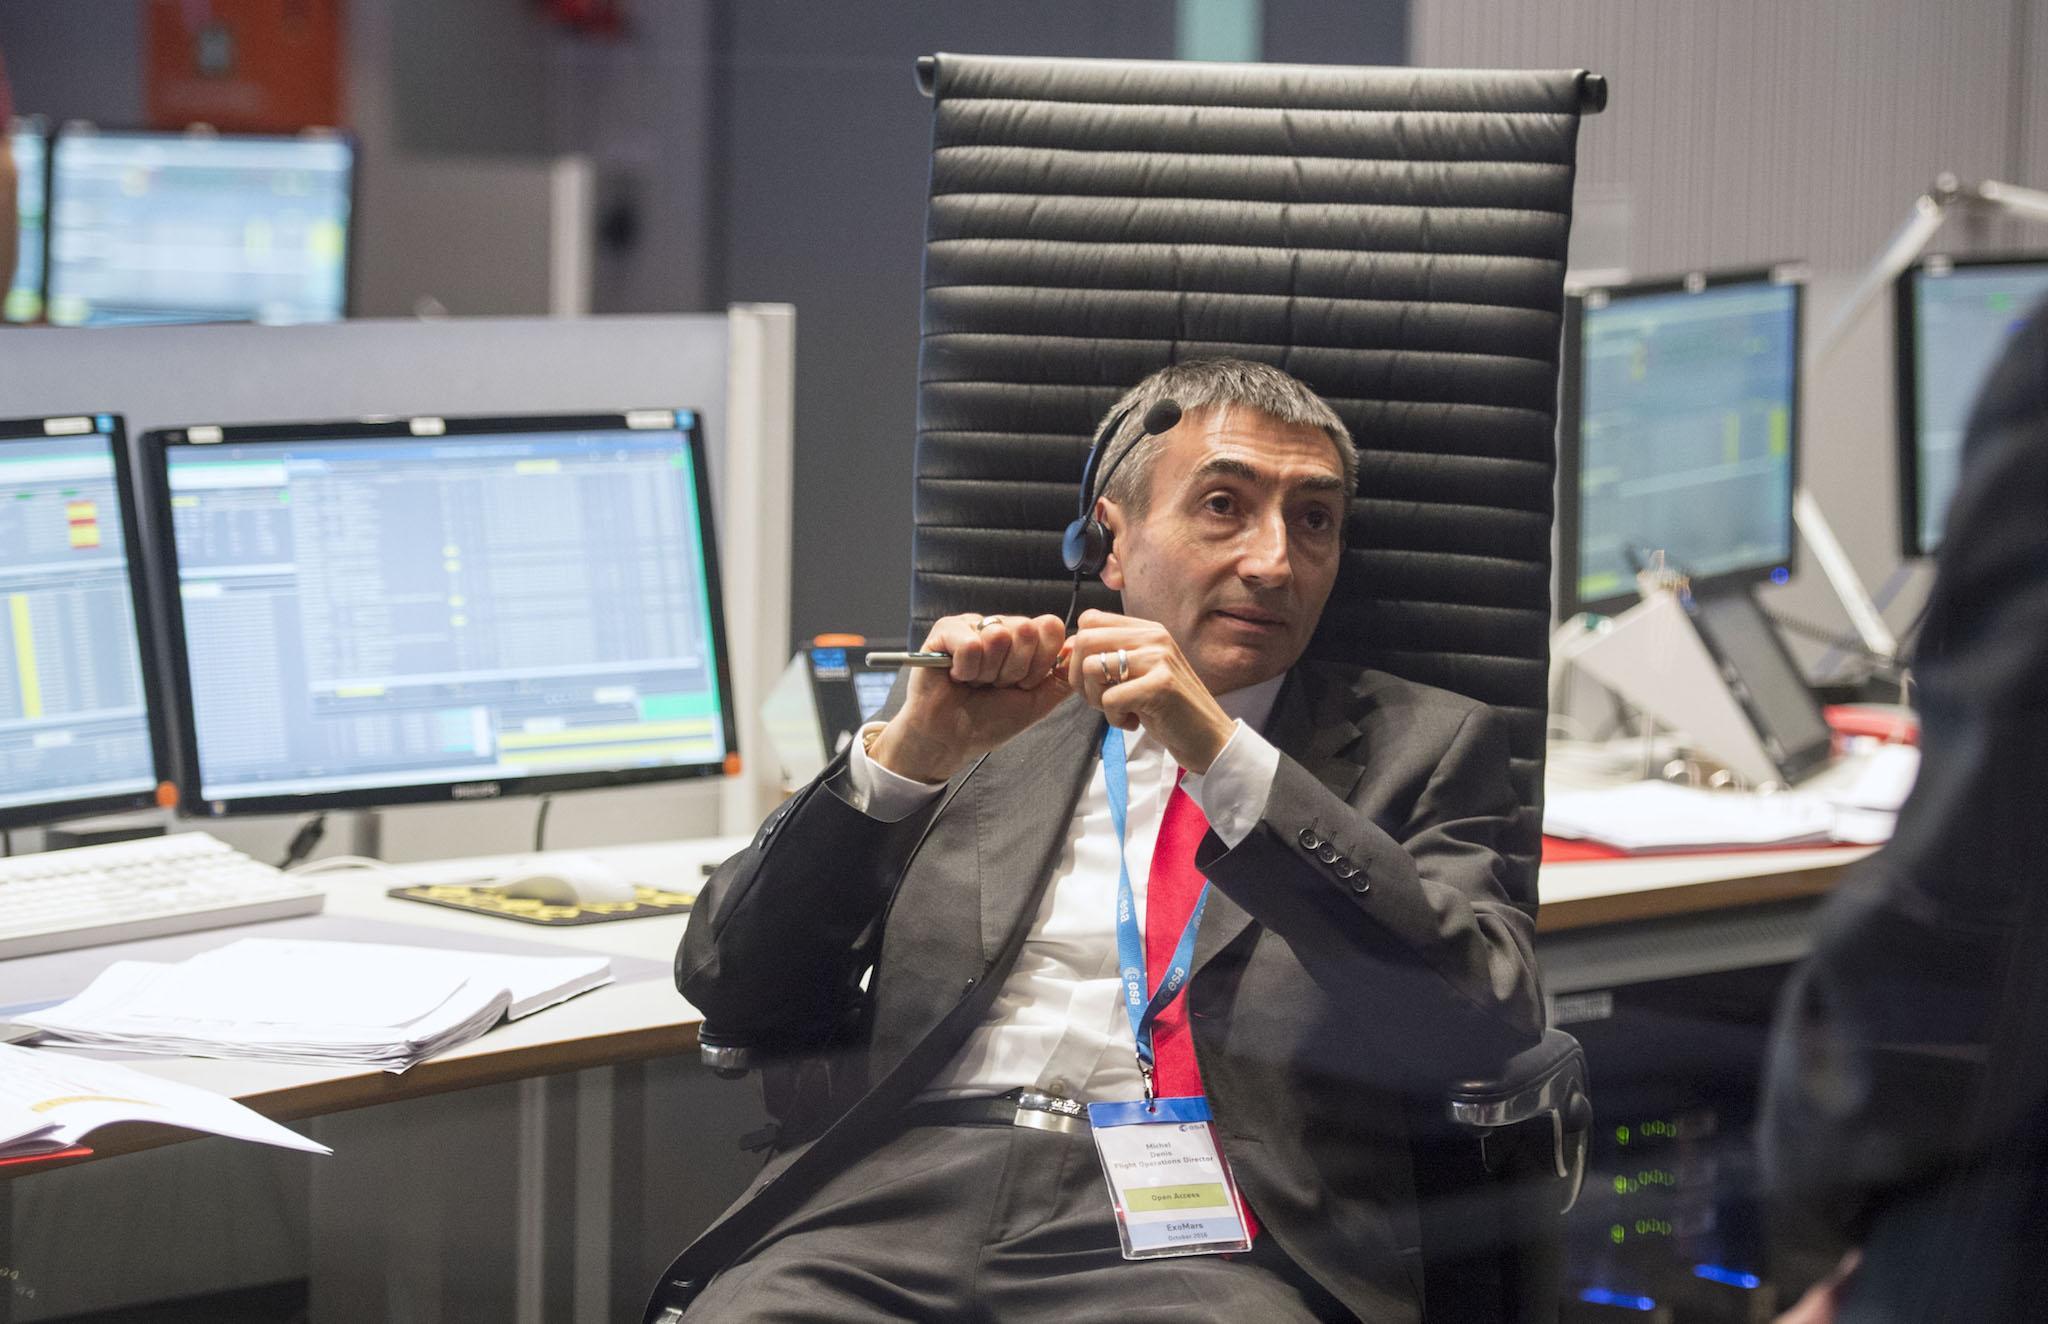 Michel Denis, French ExoMars Flight Director, is seen in the main control room of the European Space Agency (ESA) prior to the expected landing of the decent modul Schiaparelli of European-Russian ExoMars 2016 mission